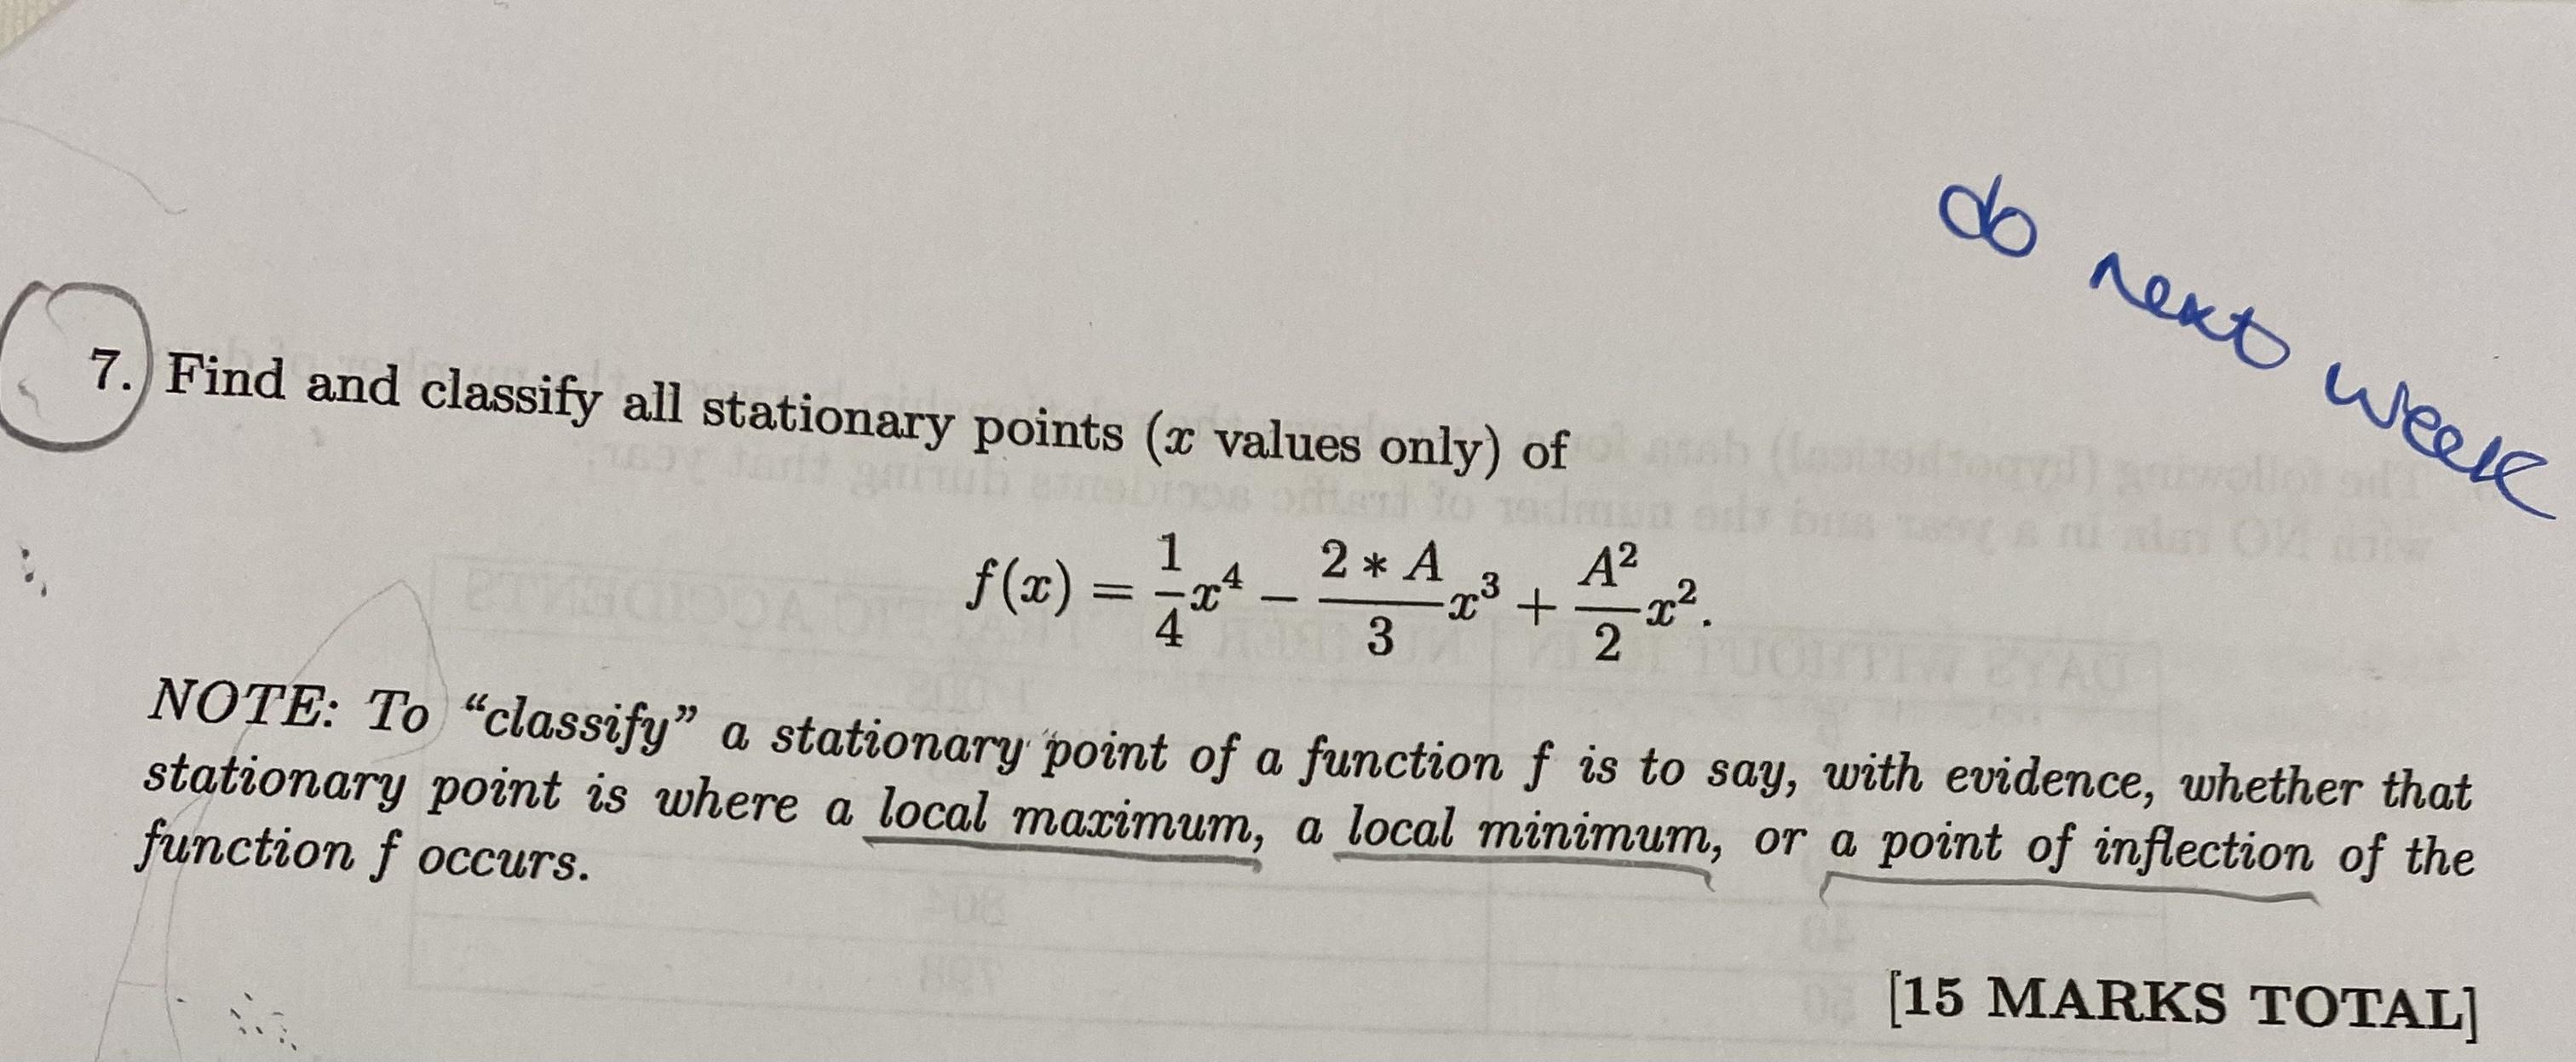 7.) Find and classify all stationary points (x values only) of 2 * A 3 f(x) = x 17121 - A 3 x +=x. 2 do next